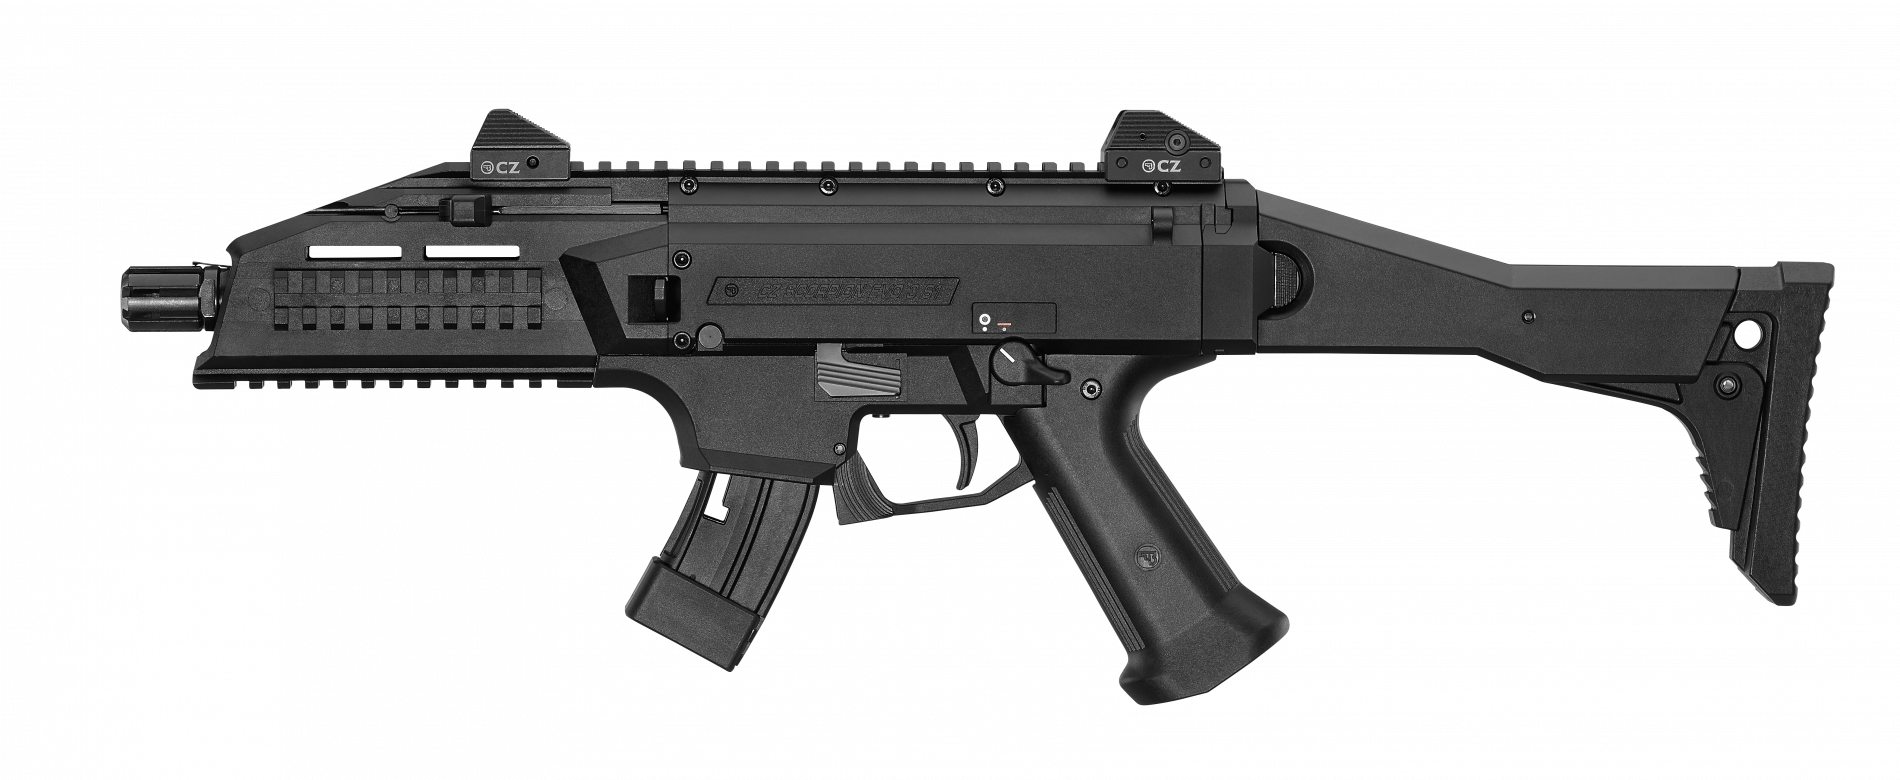 Introducing the NEW 22LR CZ Scorpion EVO 3 S1 and S1 Carbine